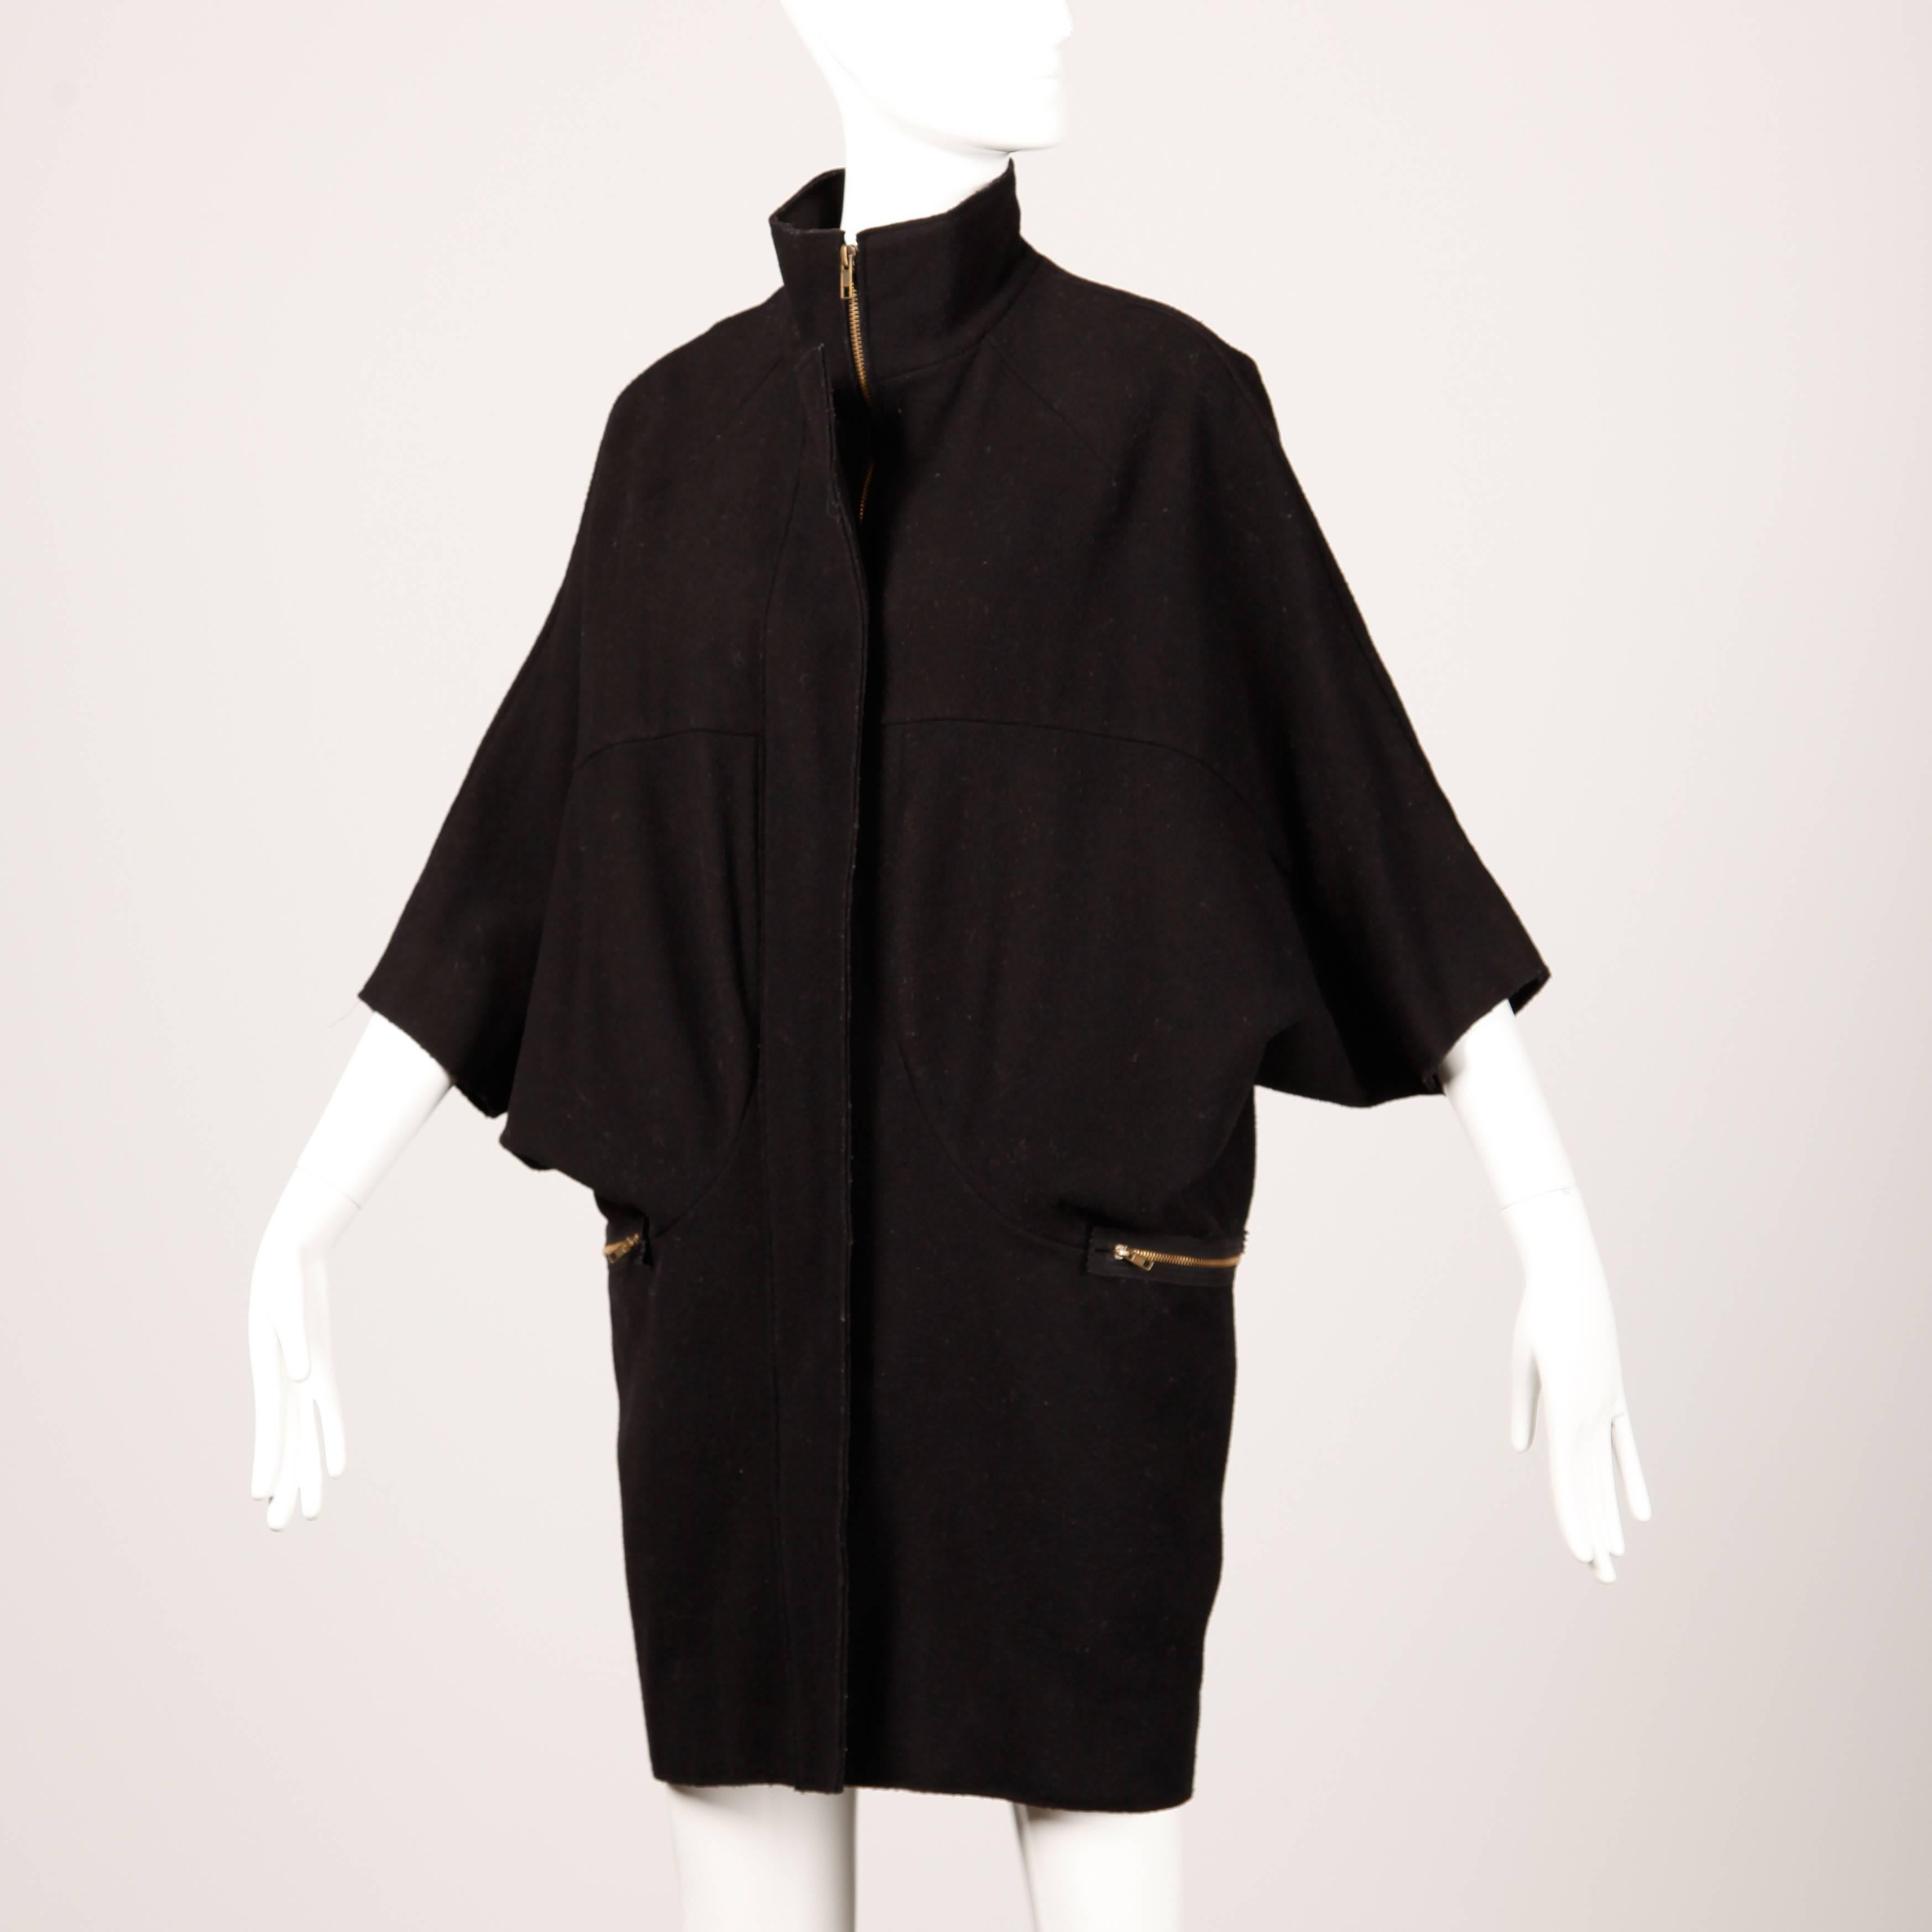 Chic black wool cape coat with dolman sleeves by Marni.

Details: 

Unlined
Front Zip Pockets
Front Zip Closure
Marked Size: 36
Estimated Size: Free
Color: Black
Fabric: Wool 
Label: Marni

Measurements:

Hips: 40